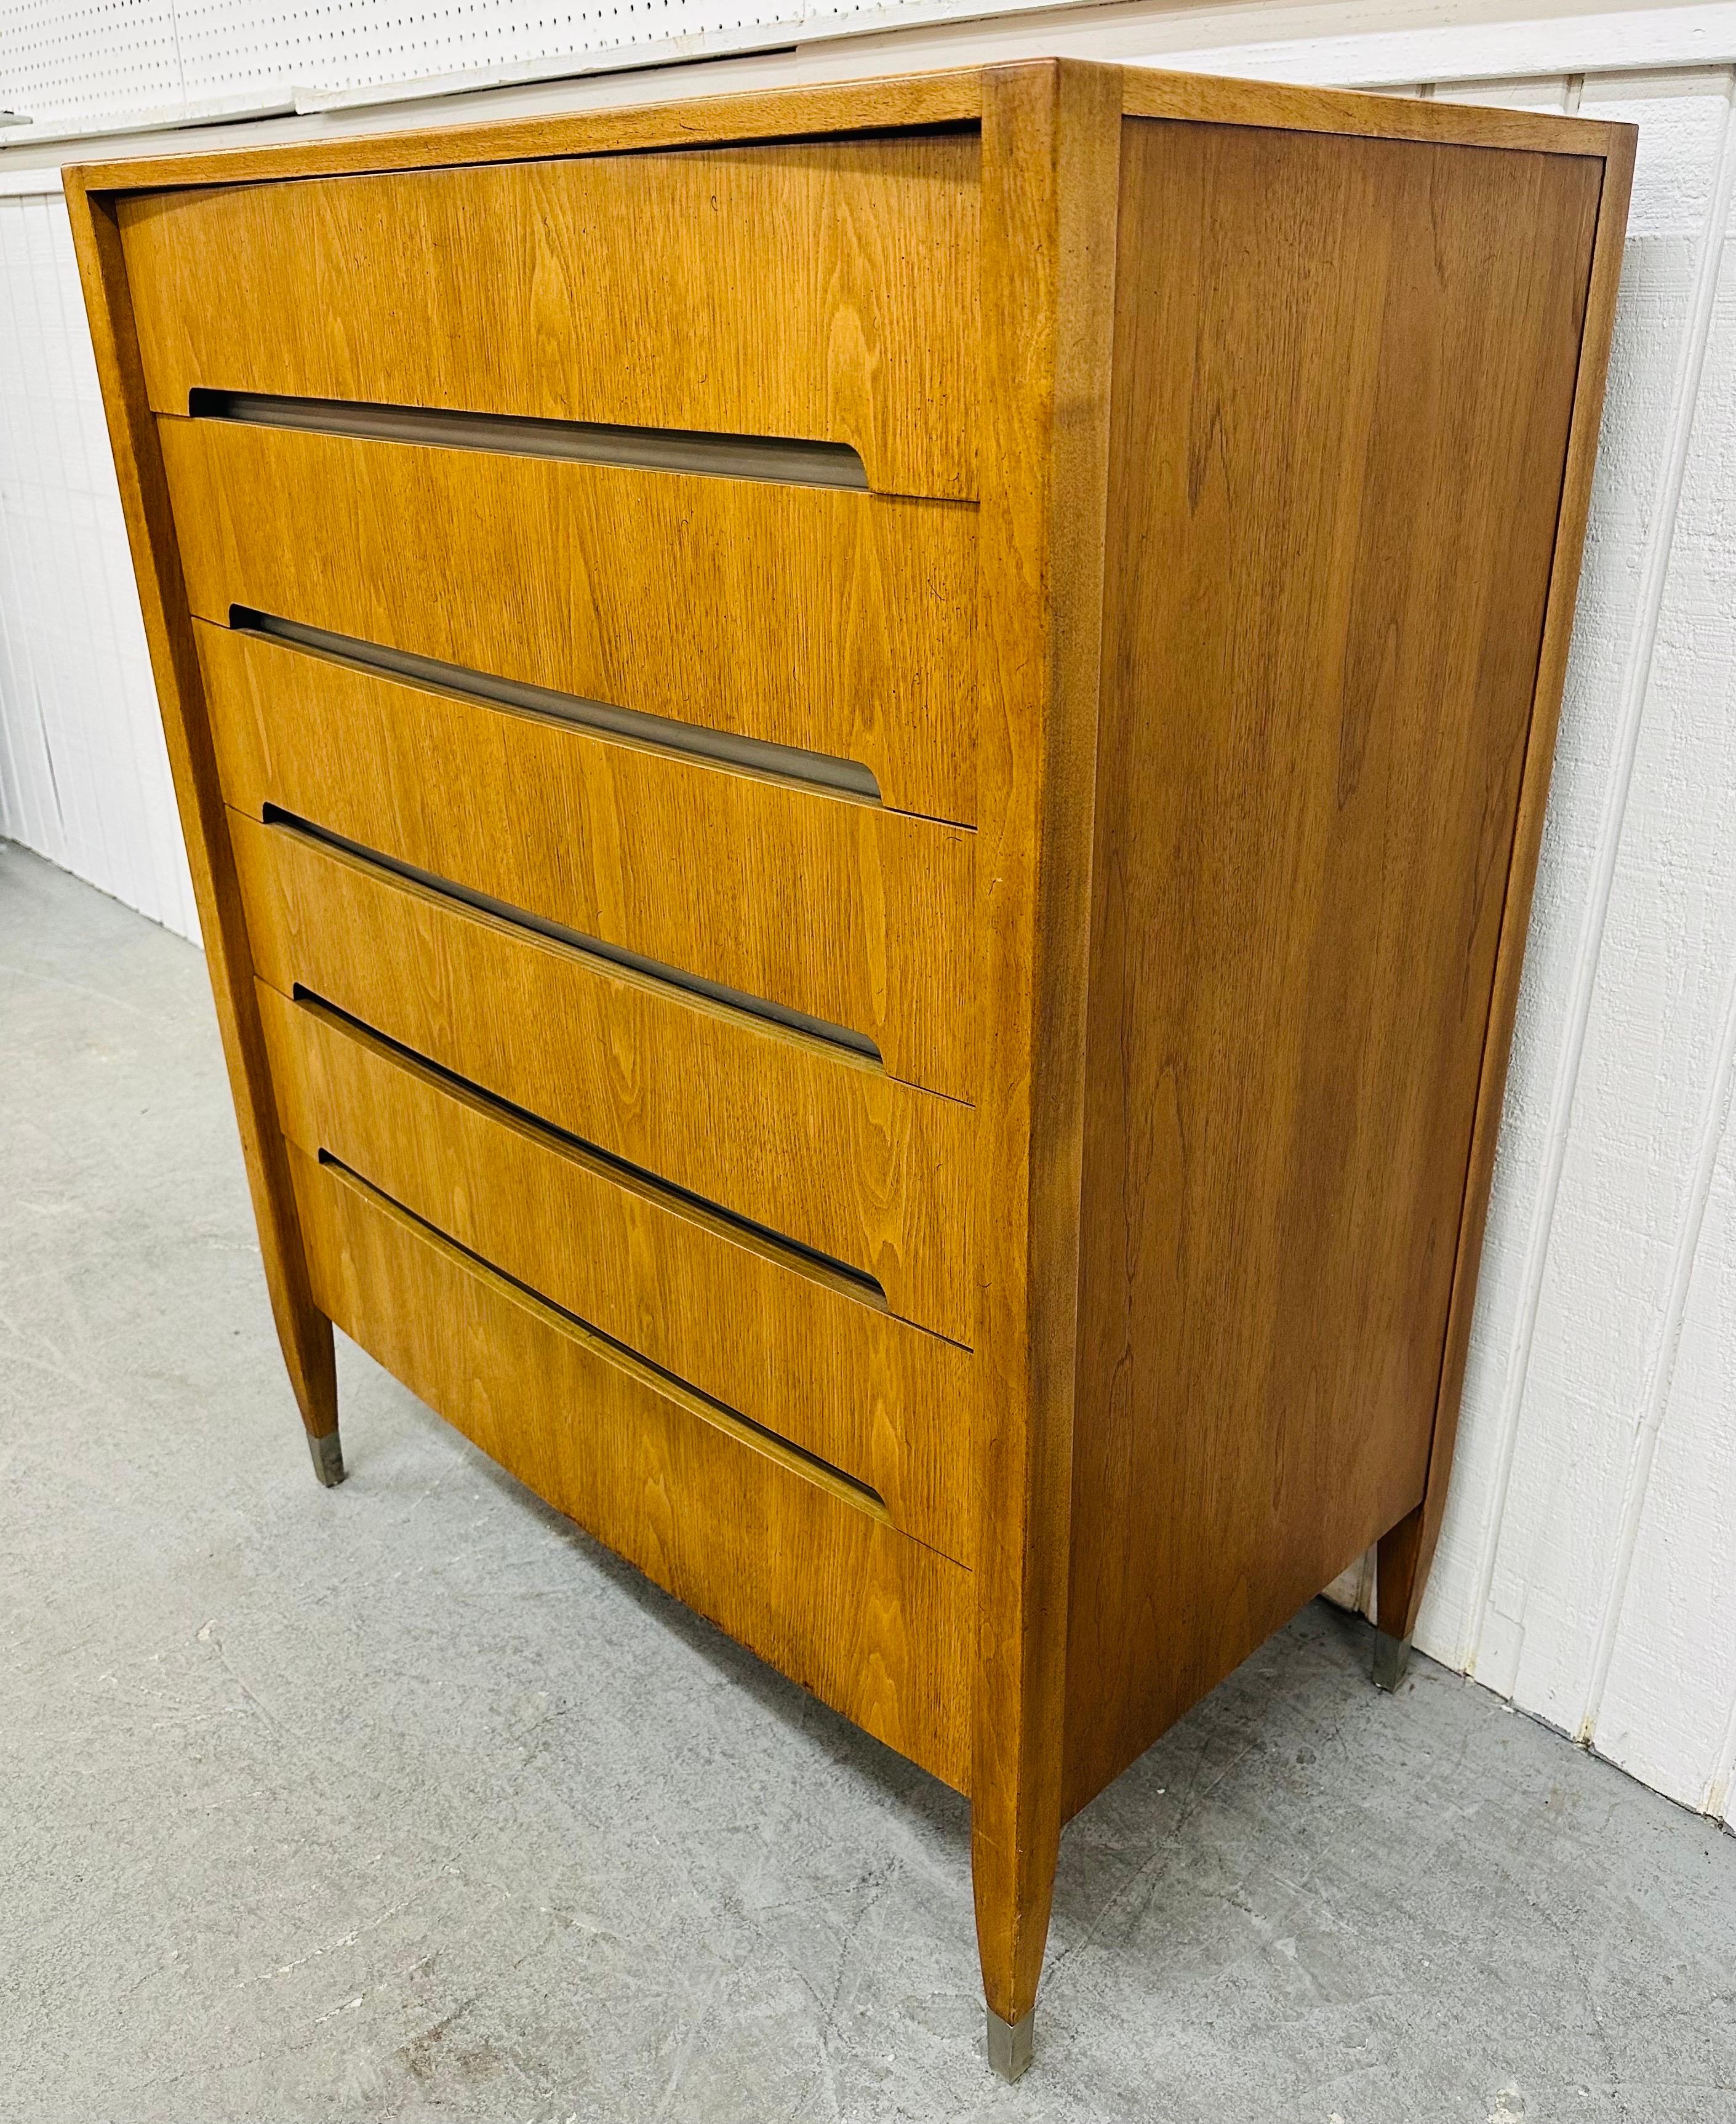 This listing is for a Mid-Century Modern Sligh Walnut High Chest. Featuring a straight line design, six drawers for storage, recessed handles, chrome trim with caps on the feet, and a beautiful walnut finish. This is an exceptional combination of